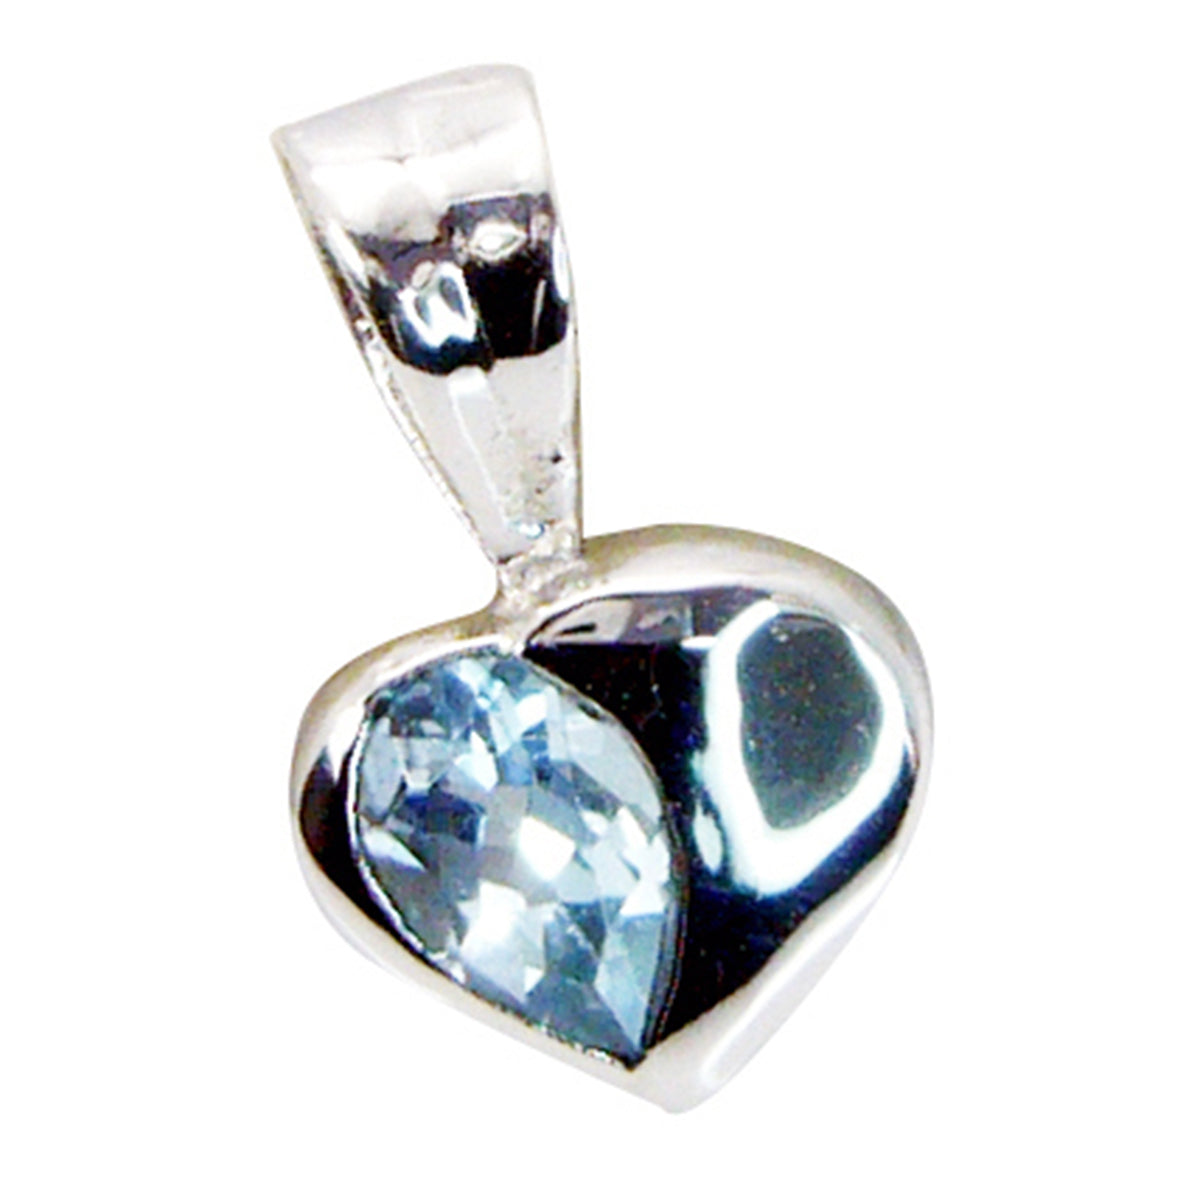 Riyo Natural Gemstone Heart Faceted Blue Blue Topaz 925 Sterling Silver Pendant new years day gift